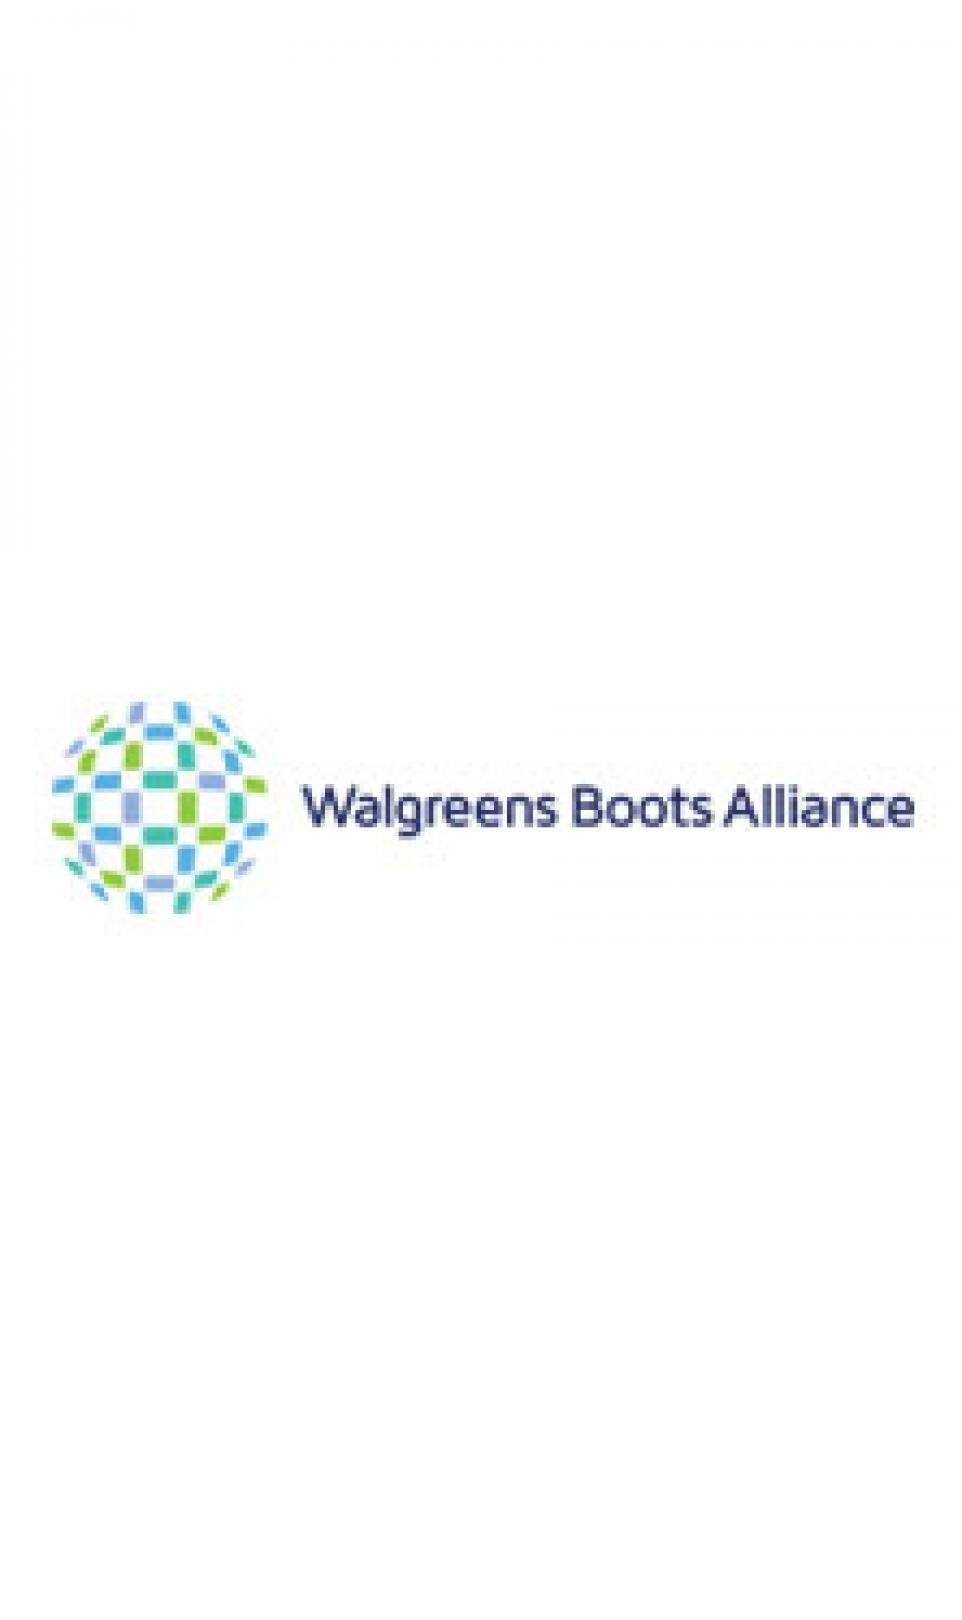 The Walgreens Boots Alliance logo pictured on a white background